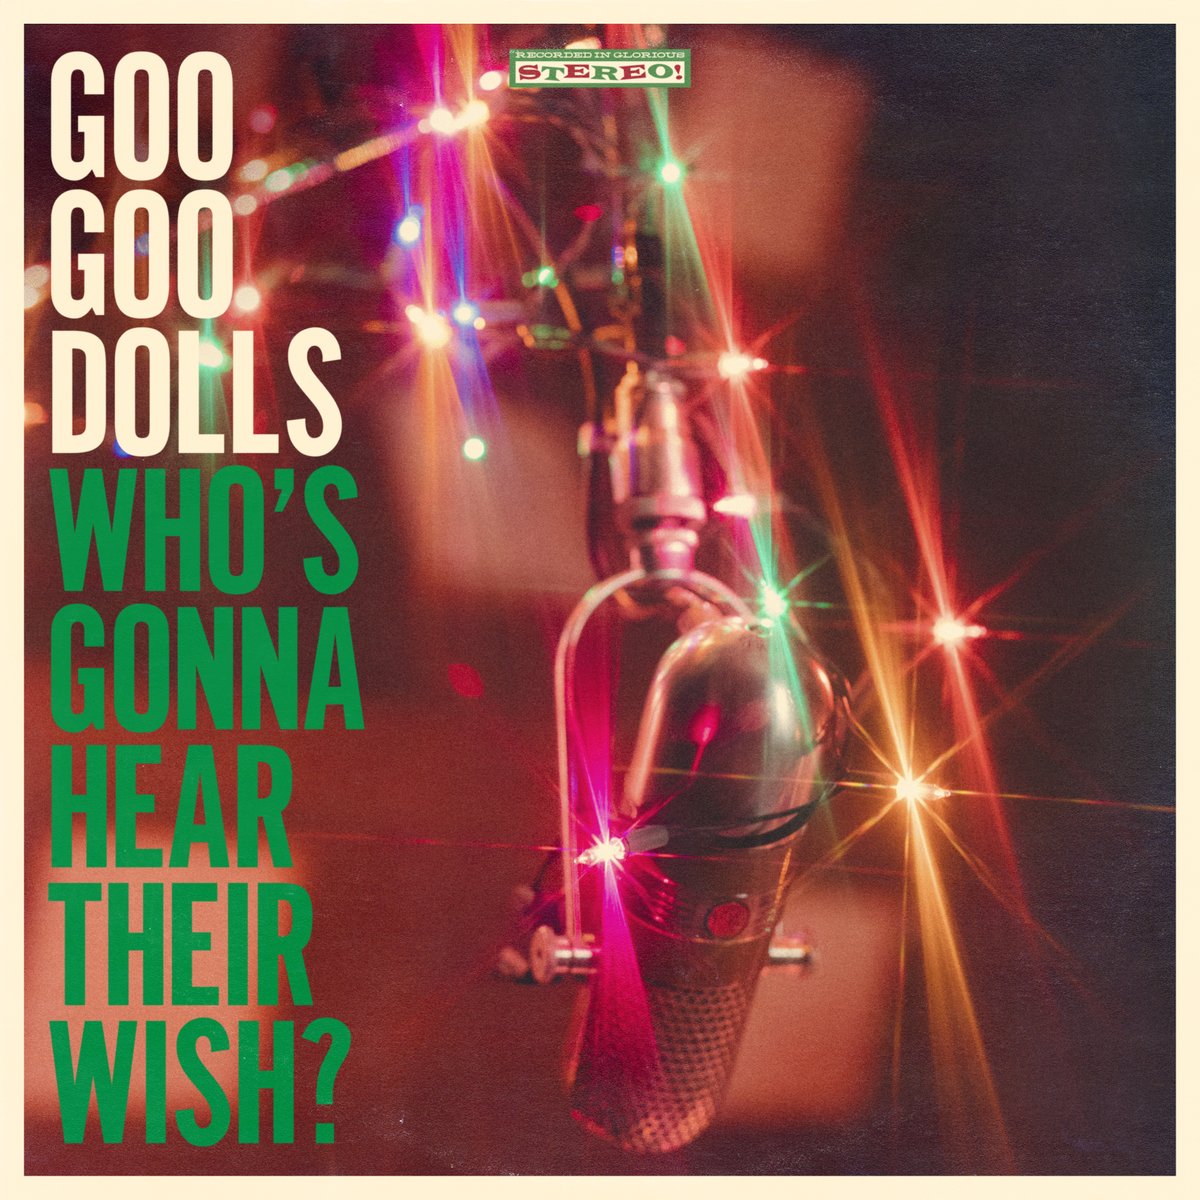 Returning once again to the What’s In-Store Music Holiday Program, keep an ear out for @googoodolls as their song 'Who's Gonna Hear Their Wish' plays overhead in retailers this Christmas season. You can also stream the song HERE on our #spotify #playlist spoti.fi/3R1iYUh